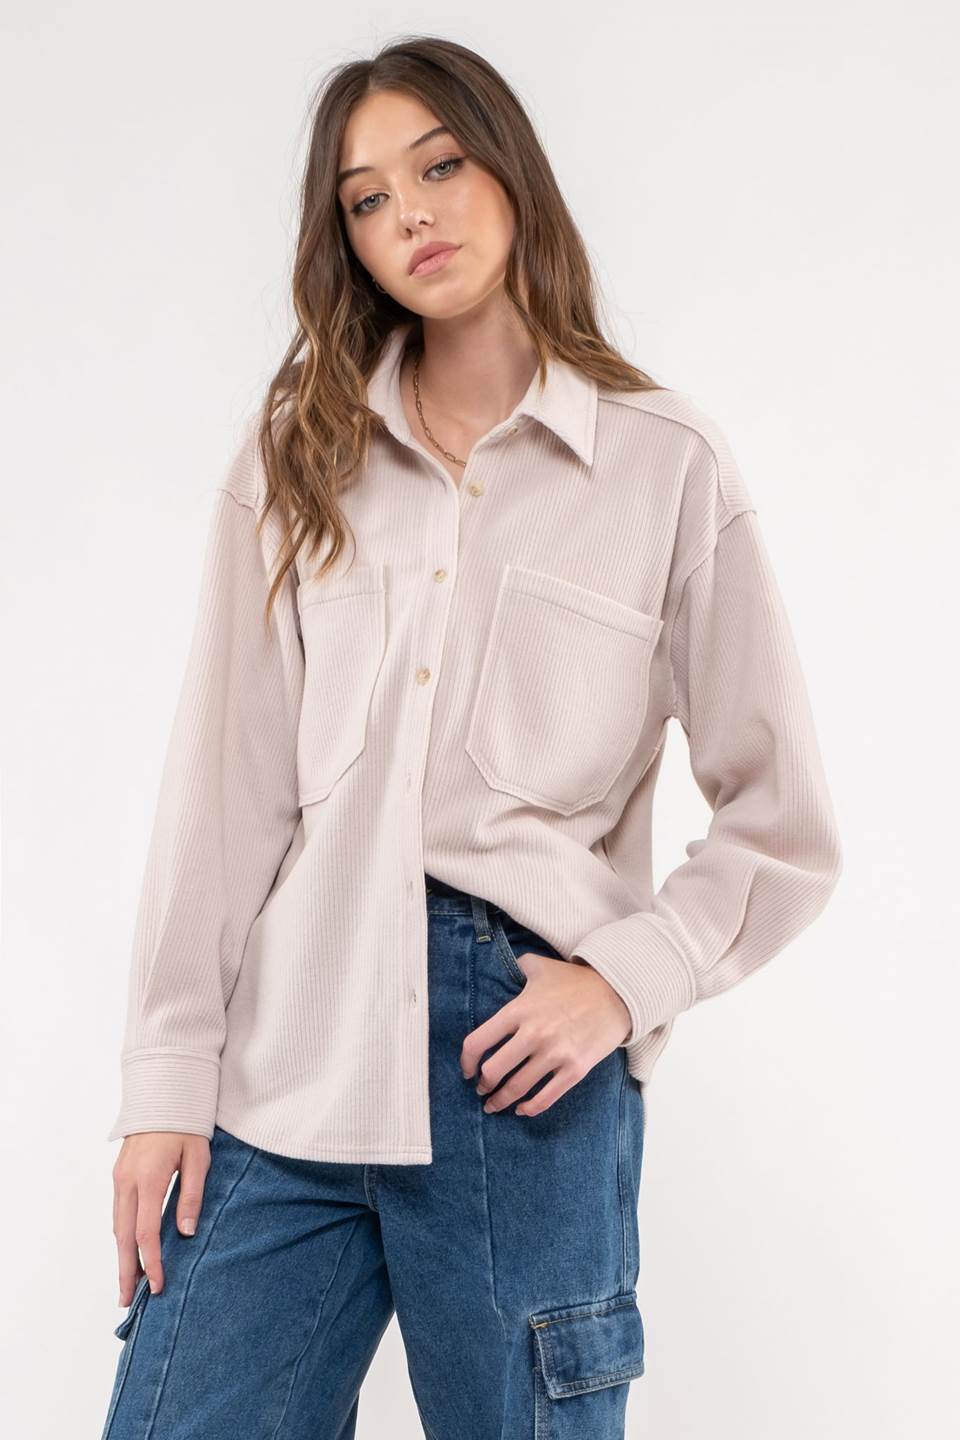 RIB KNIT EXPOSED SEAM BUTTON UP TOP